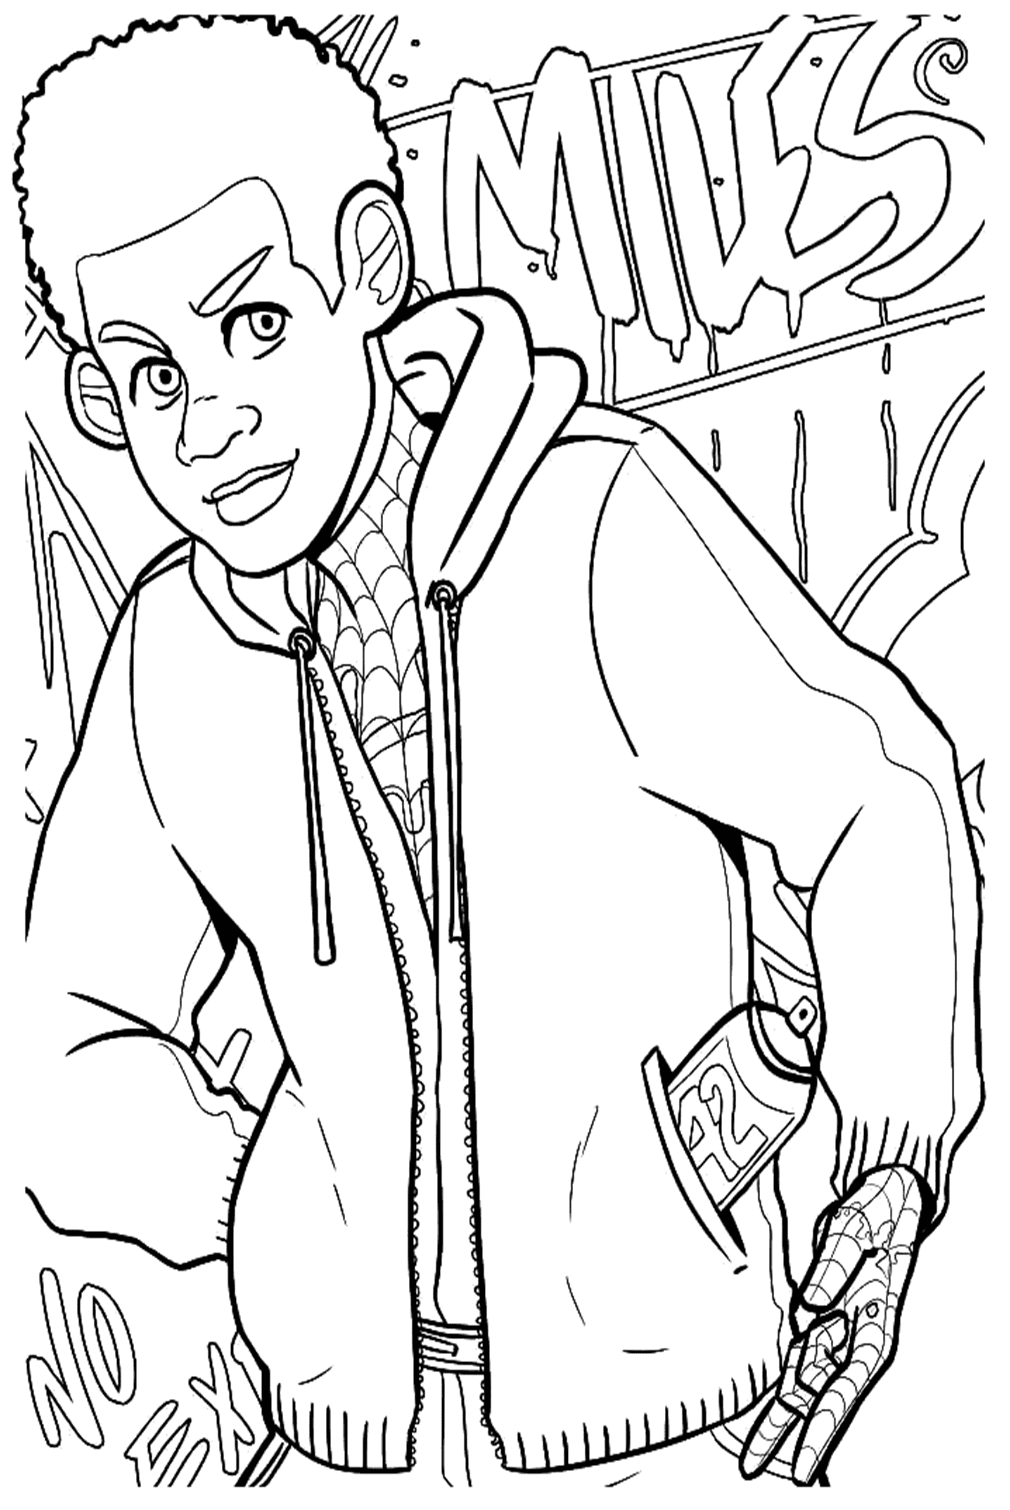 Smiling Miles Morales Coloring Pages